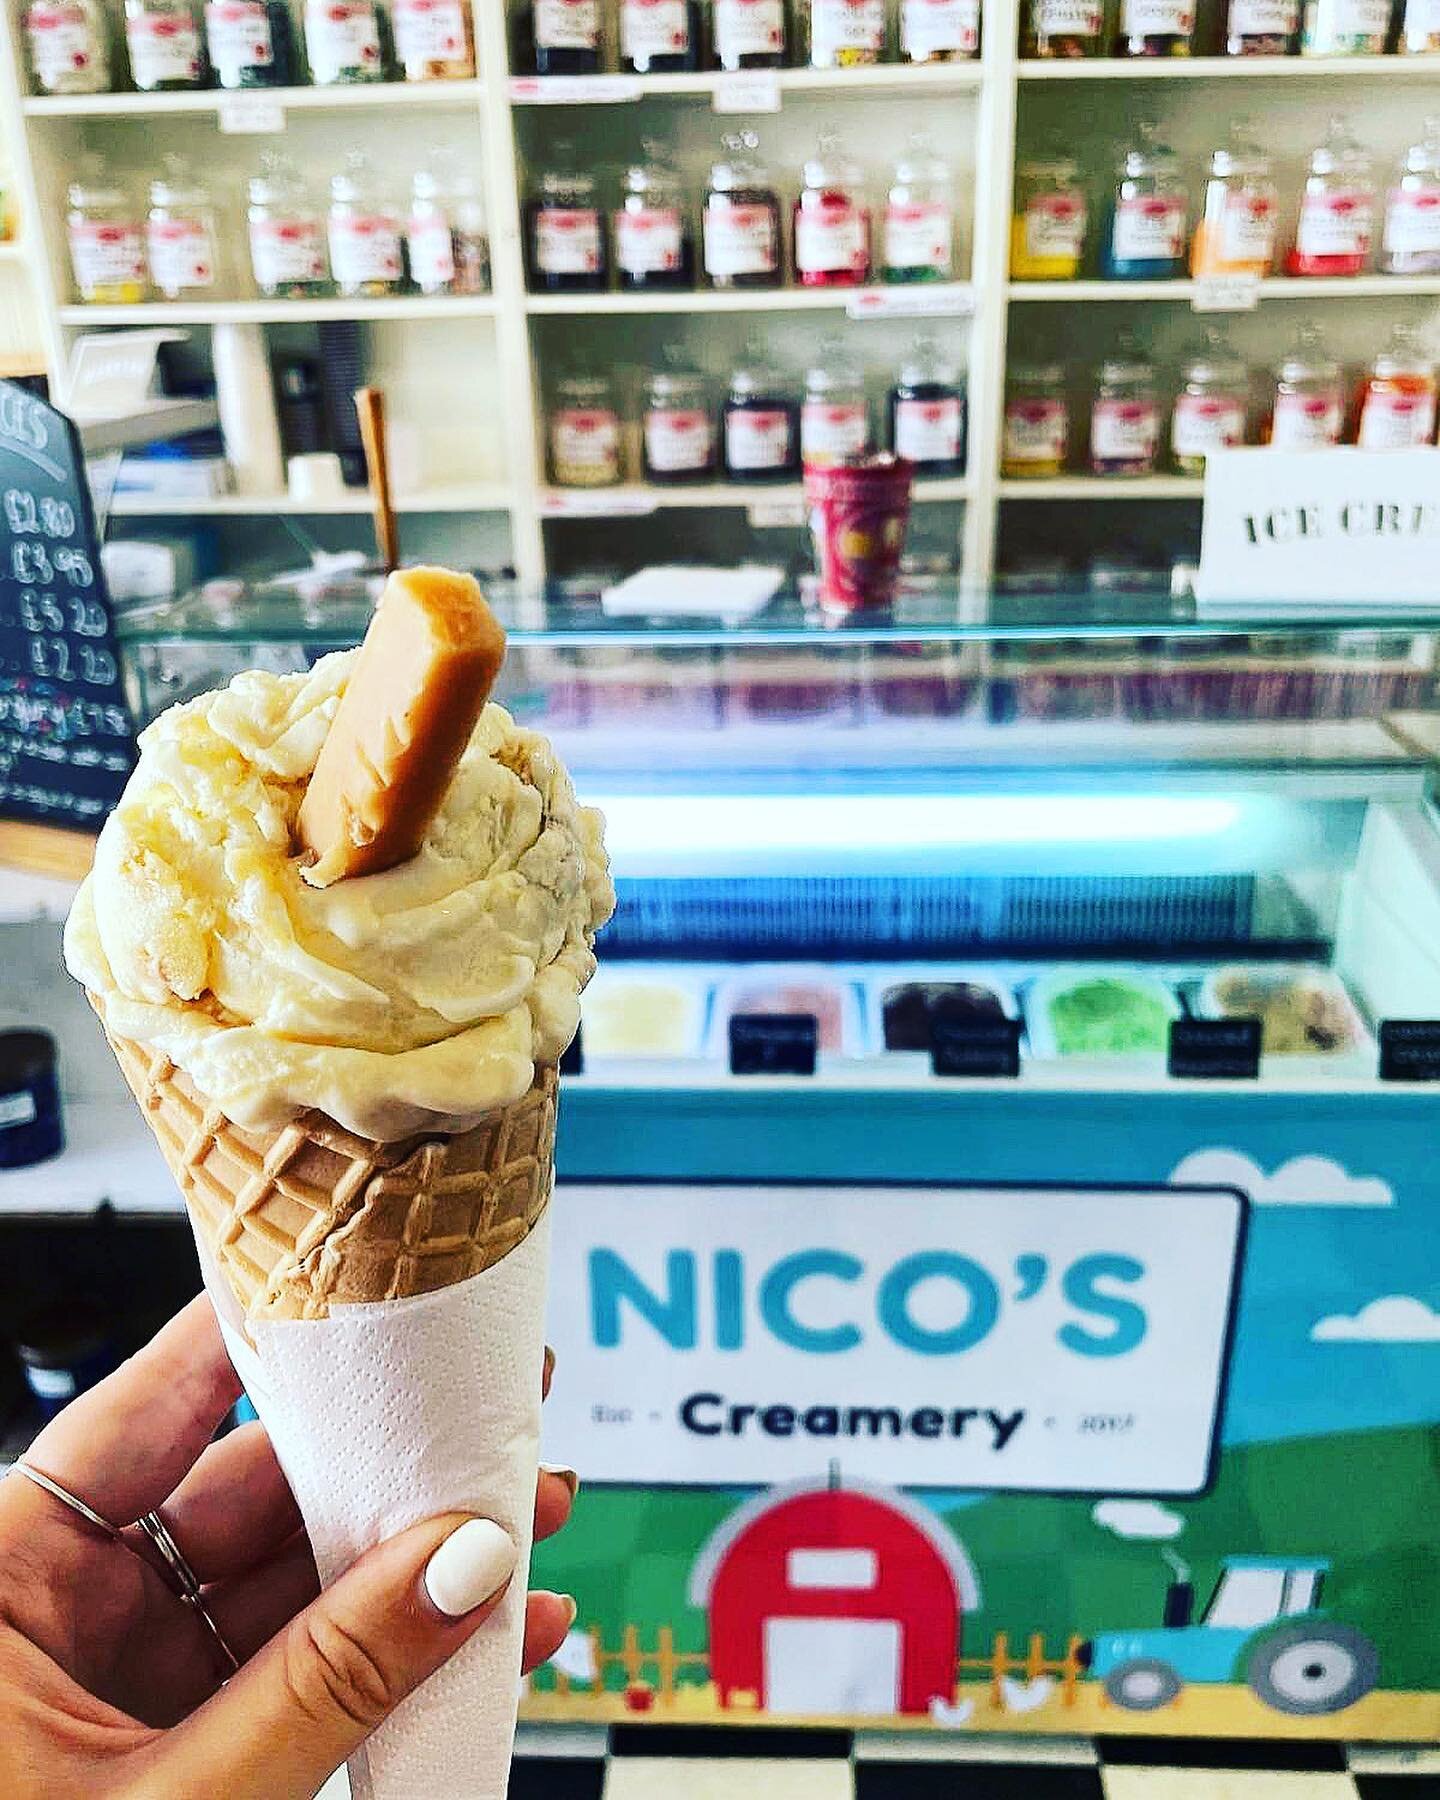 Last chance to get some of your favourites before we shuffle our flavours as part of our Summer seasonal menu! 🔀🍦 

2 days and counting! 🍦 🏃&zwj;♂️